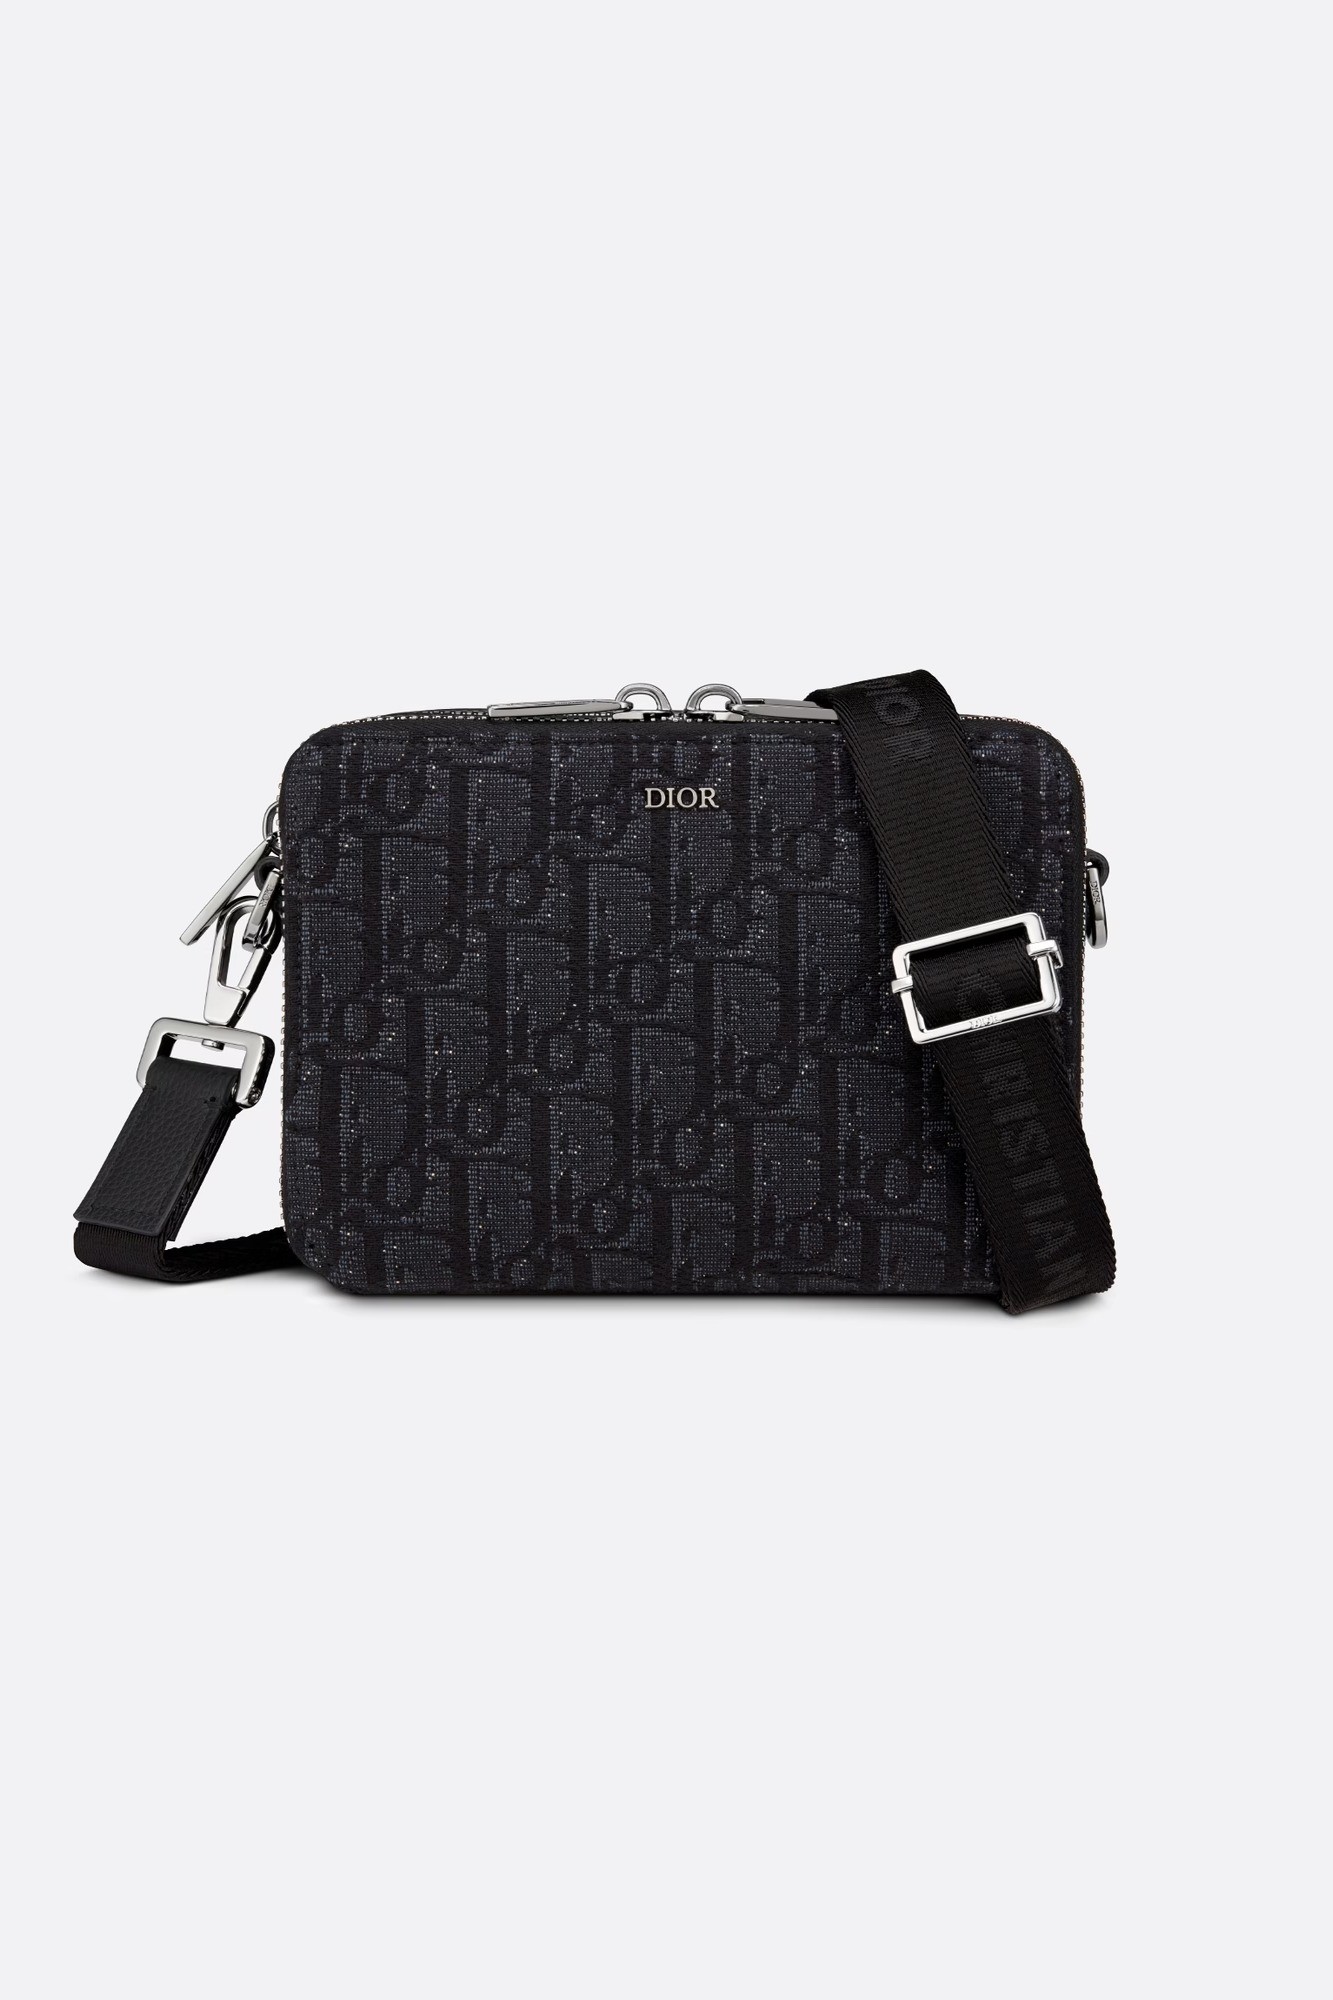 Dior - Pouch with Strap - Black